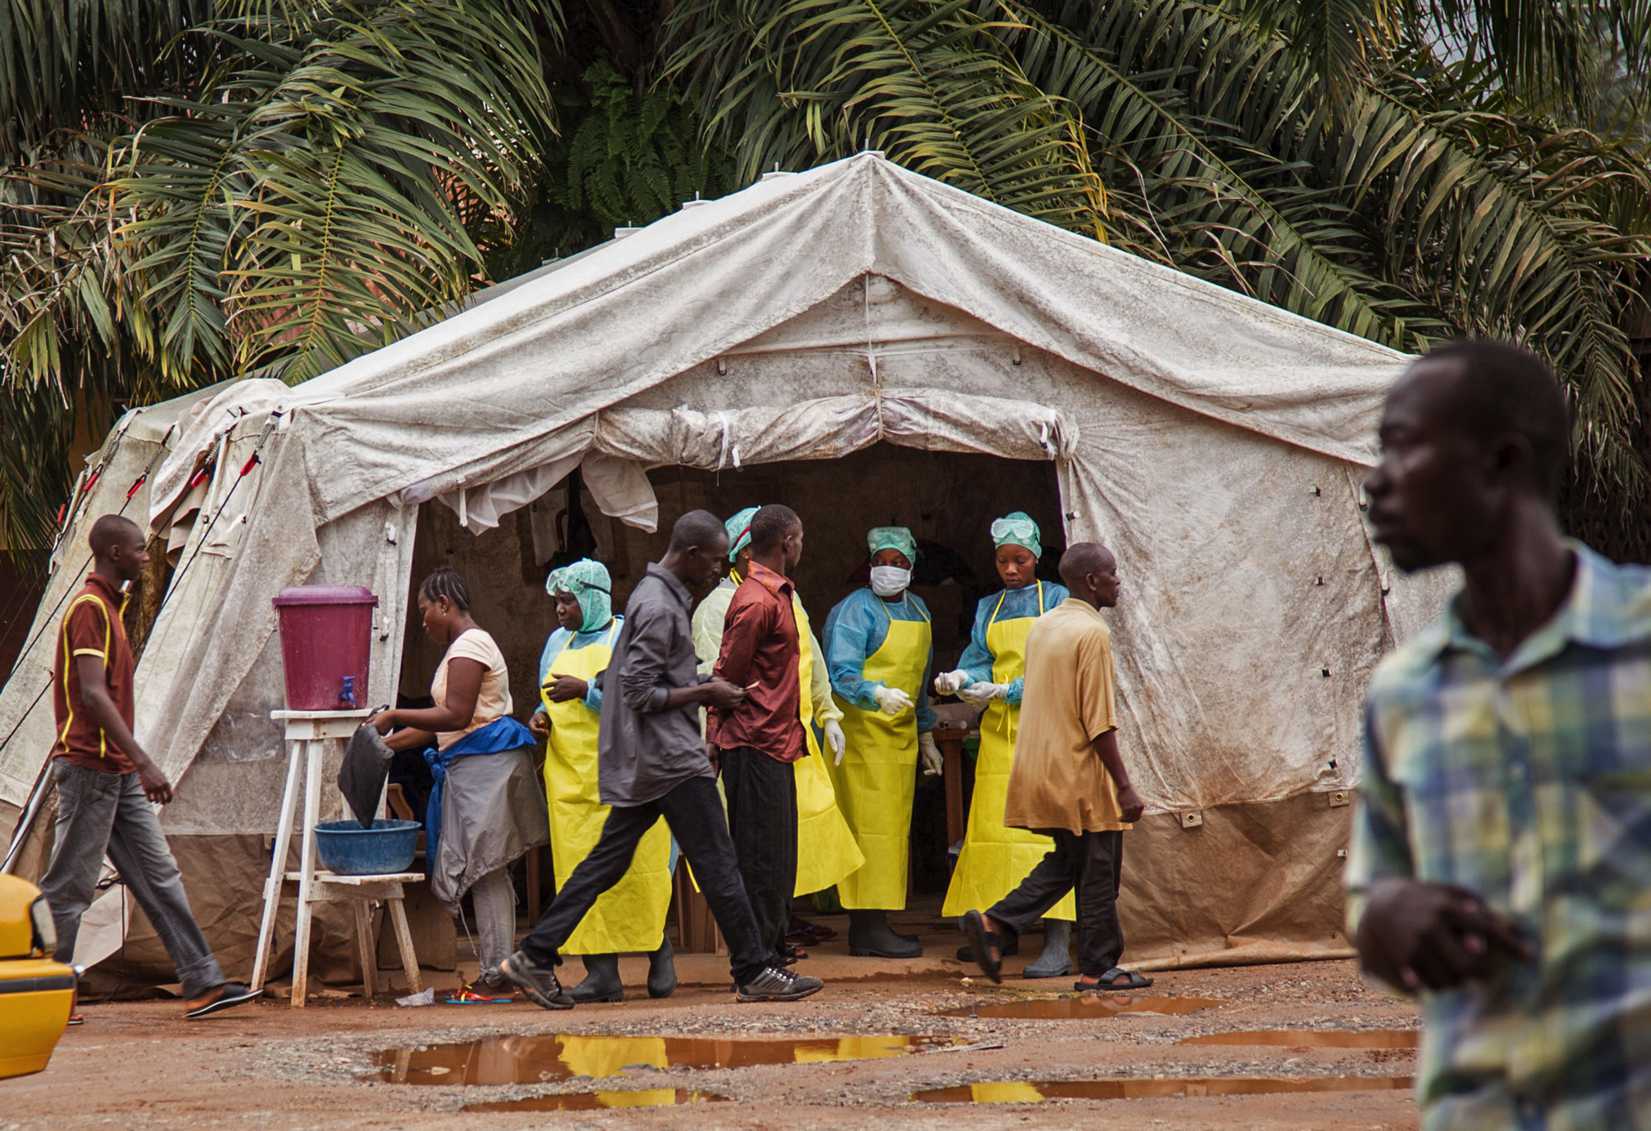 Health workers screen people for the deadly Ebola virus before entering the Kenema Government Hospital in Kenema, 300 kilometers, (186 miles) from the capital city of Freetown, Sierra Leone on August 9, 2014.